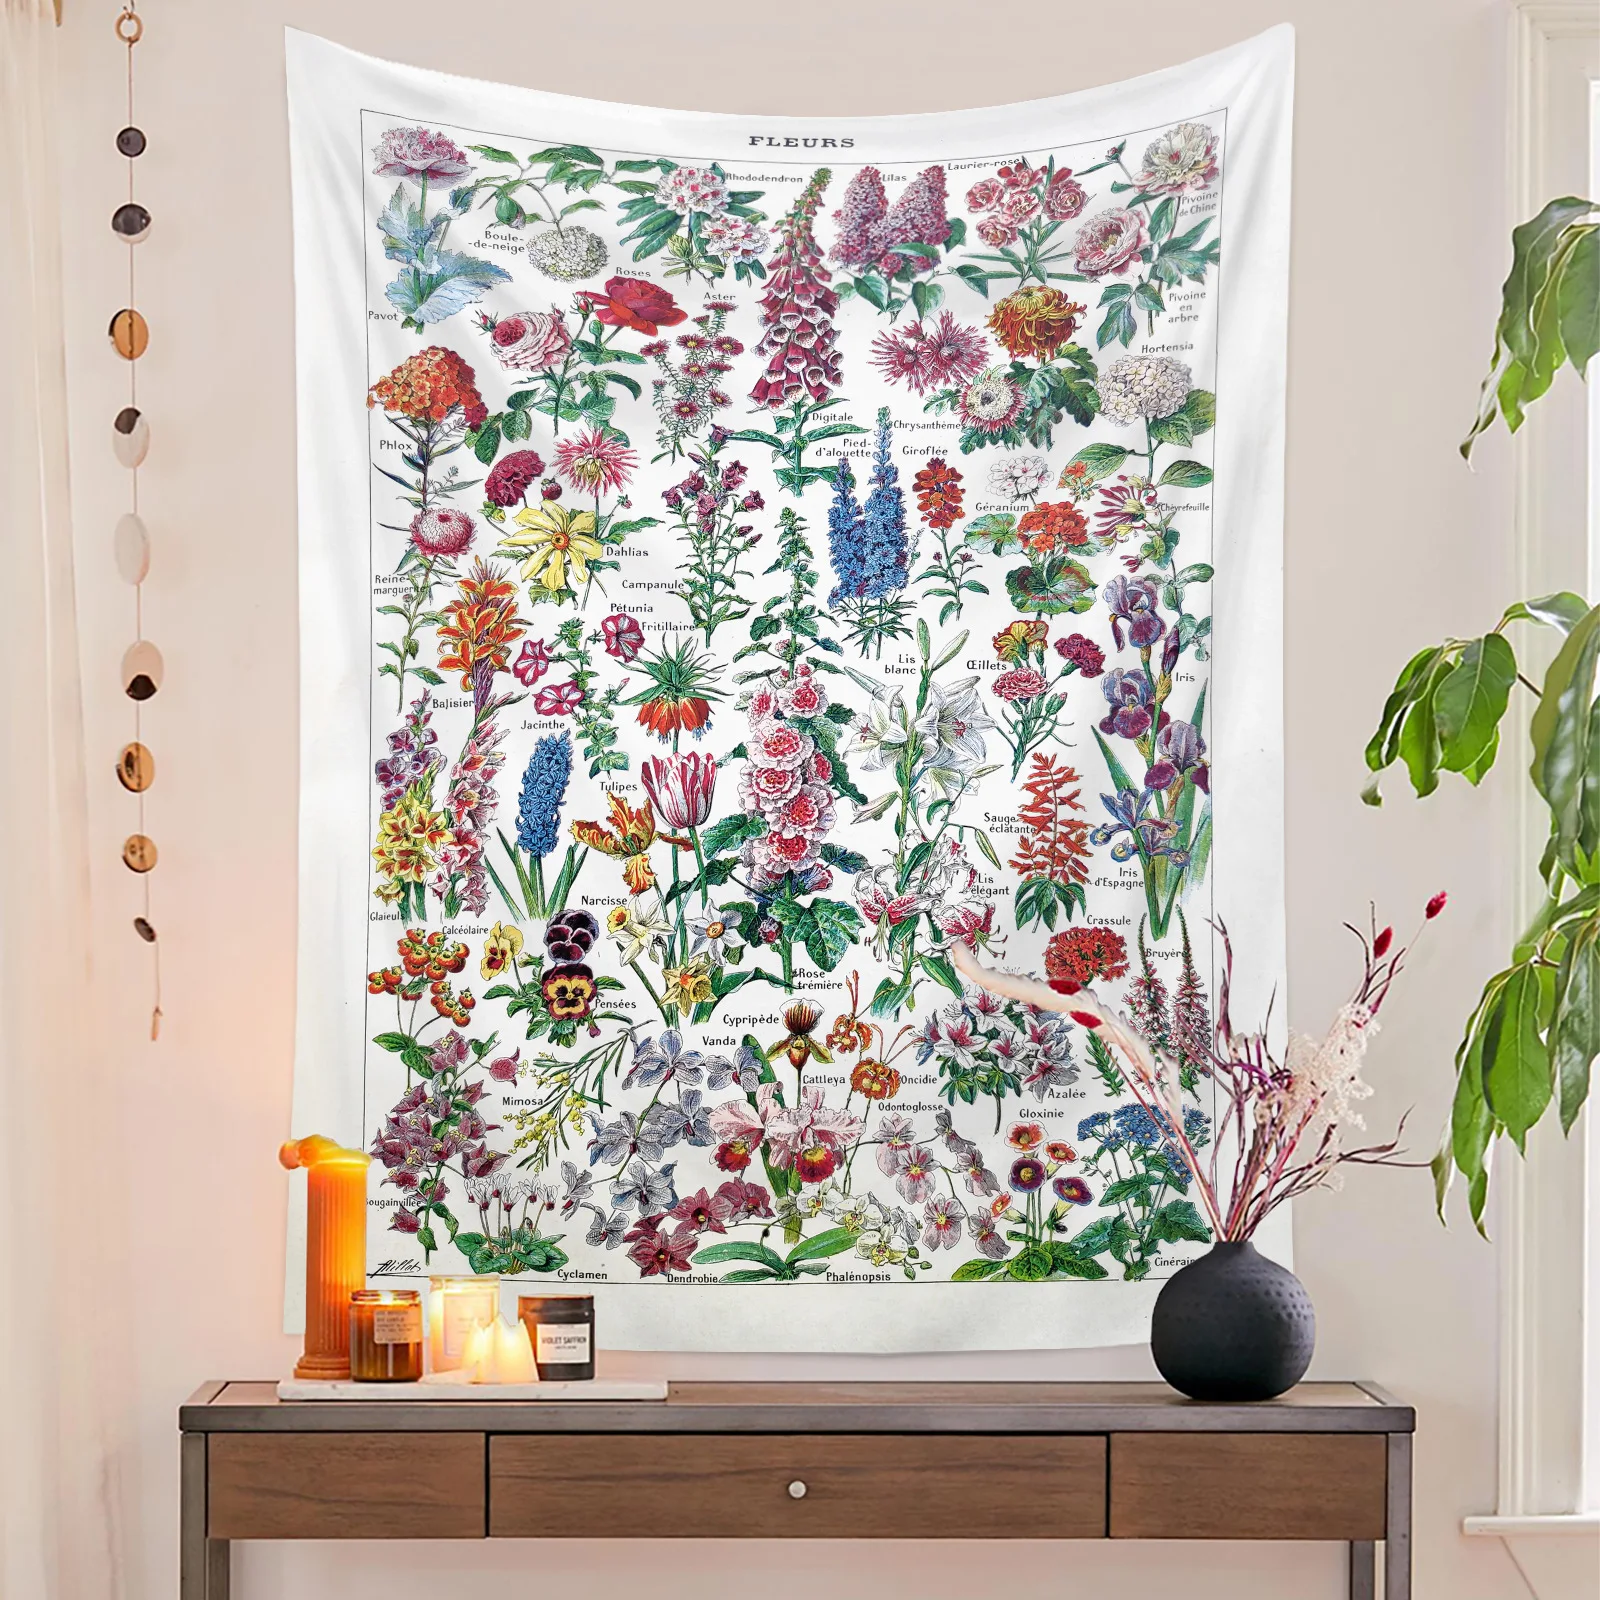 

Wildflower Tapestry Wall Hanging Flowers Botanical Floral Home Aesthetic Art Bedroom Decoration Poster Room Boho Decor Tapiz